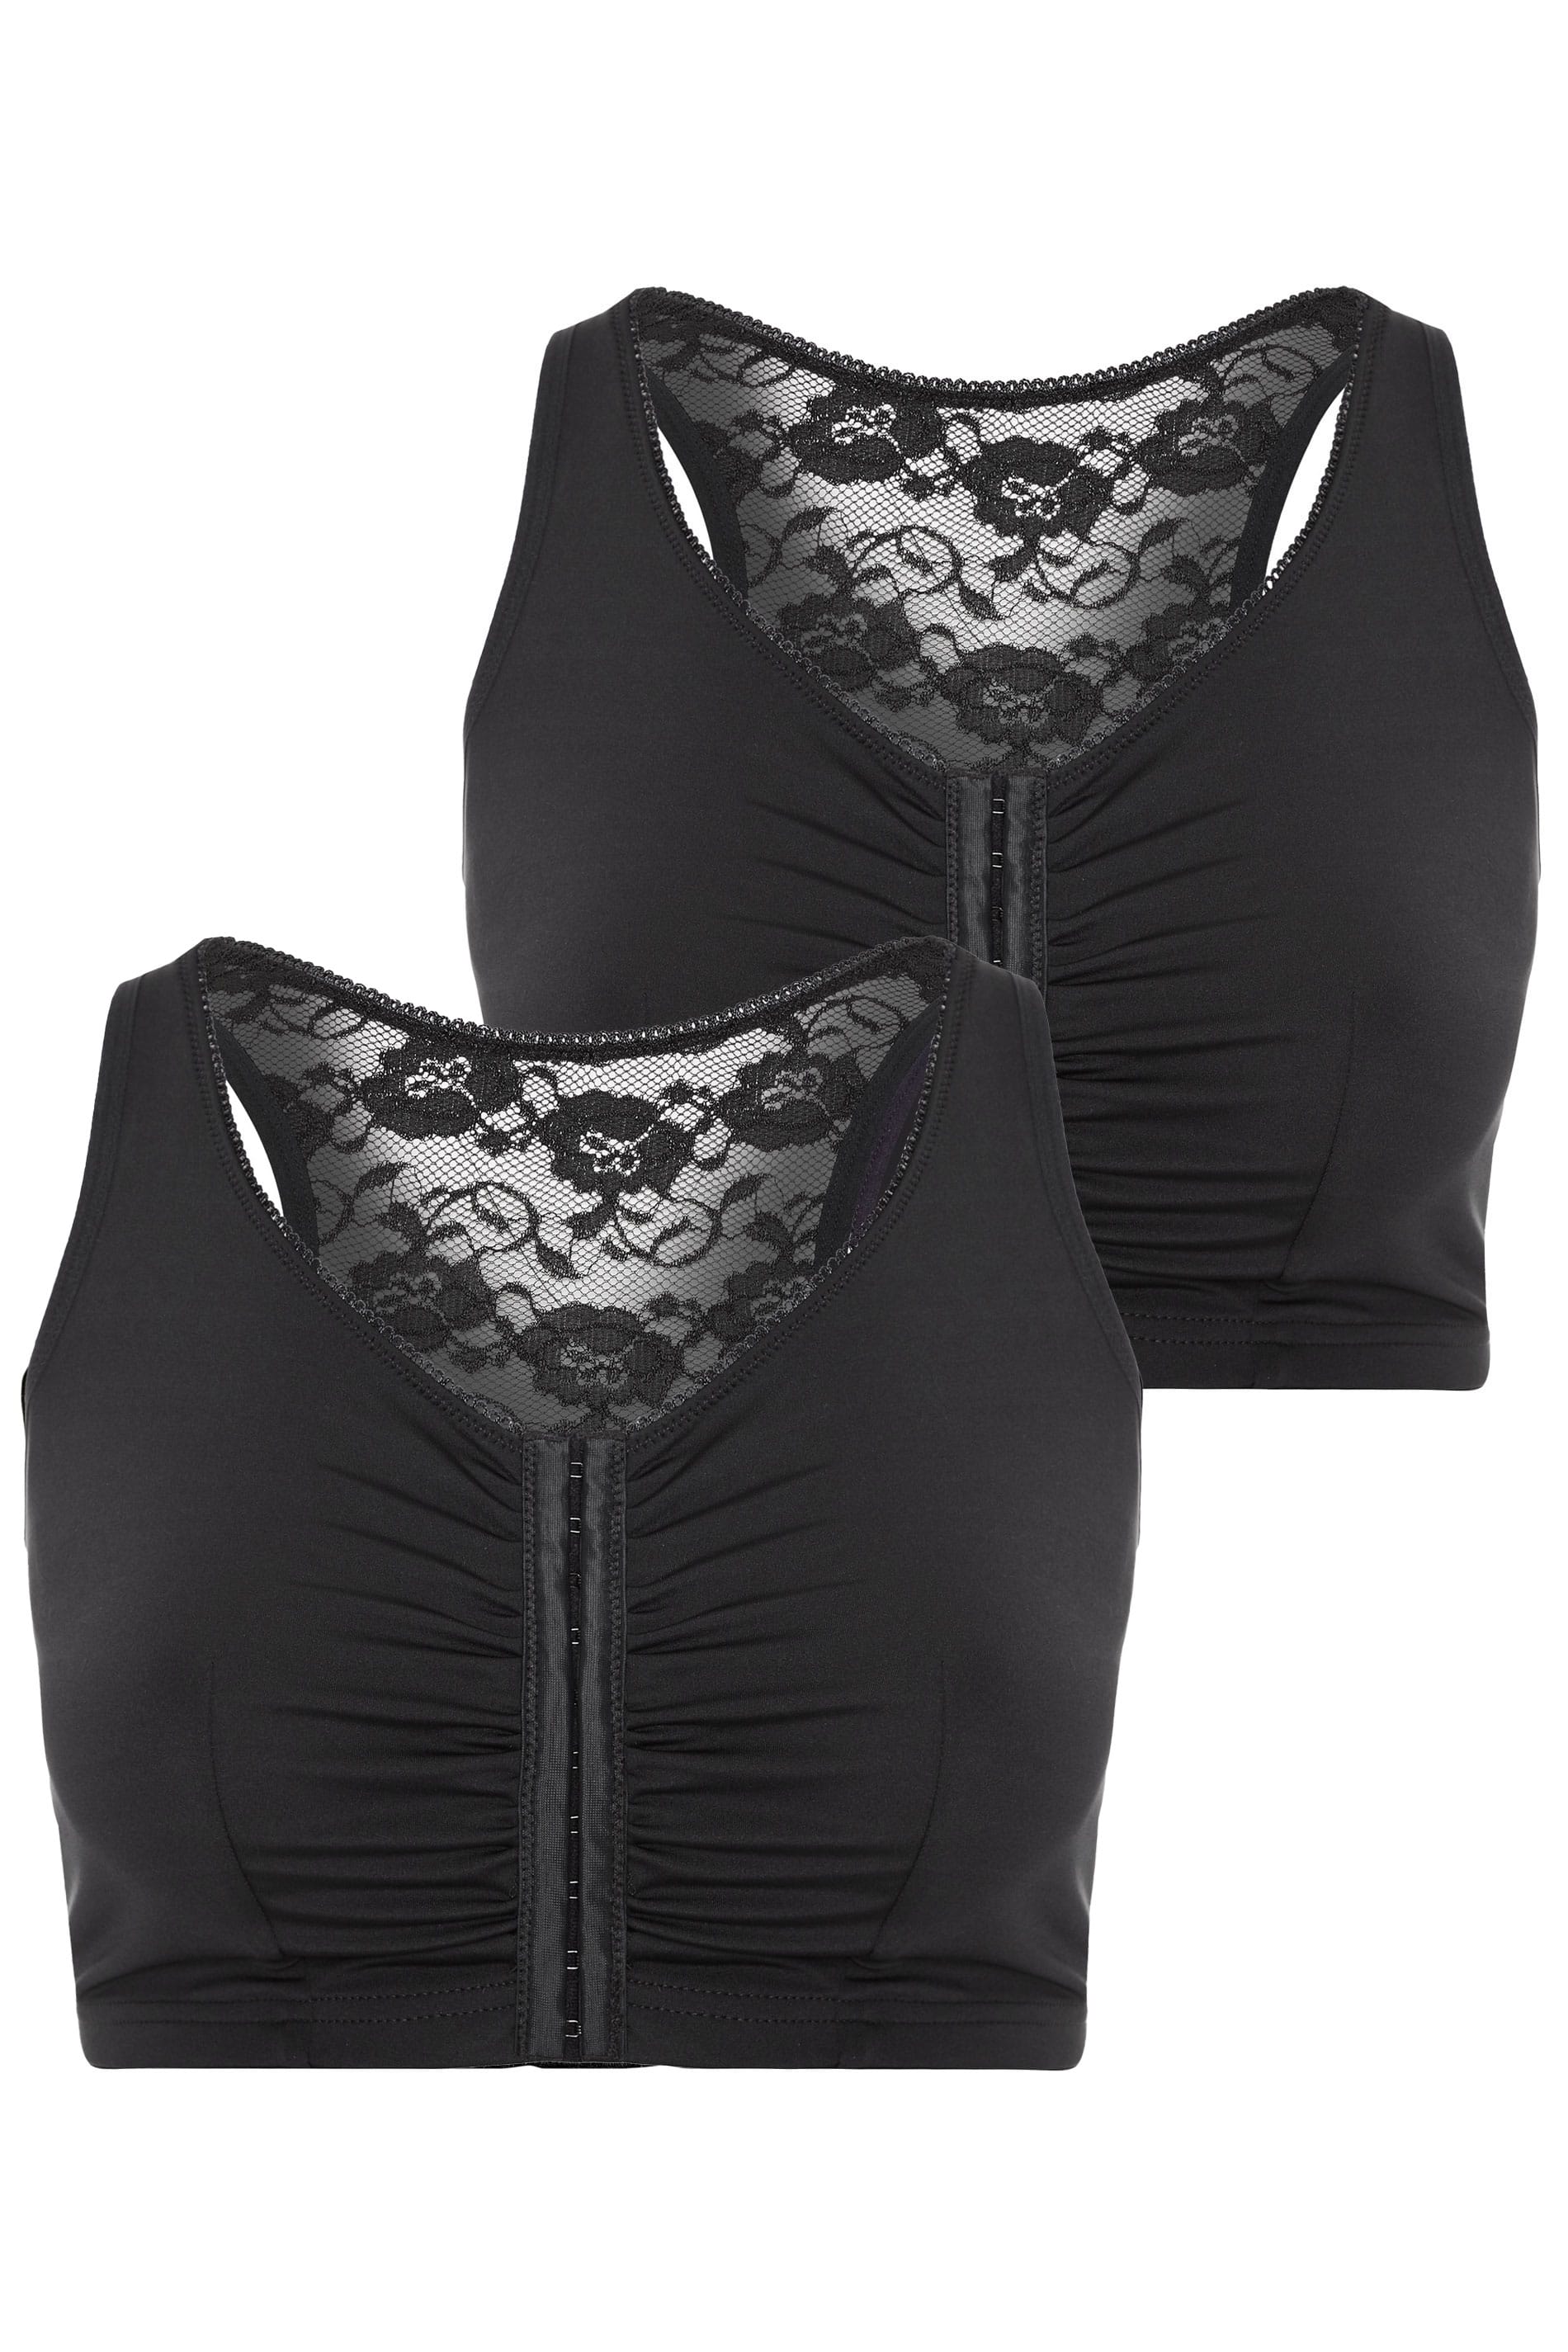 2 PACK Black Lace Front Fastening Bra | Yours Clothing